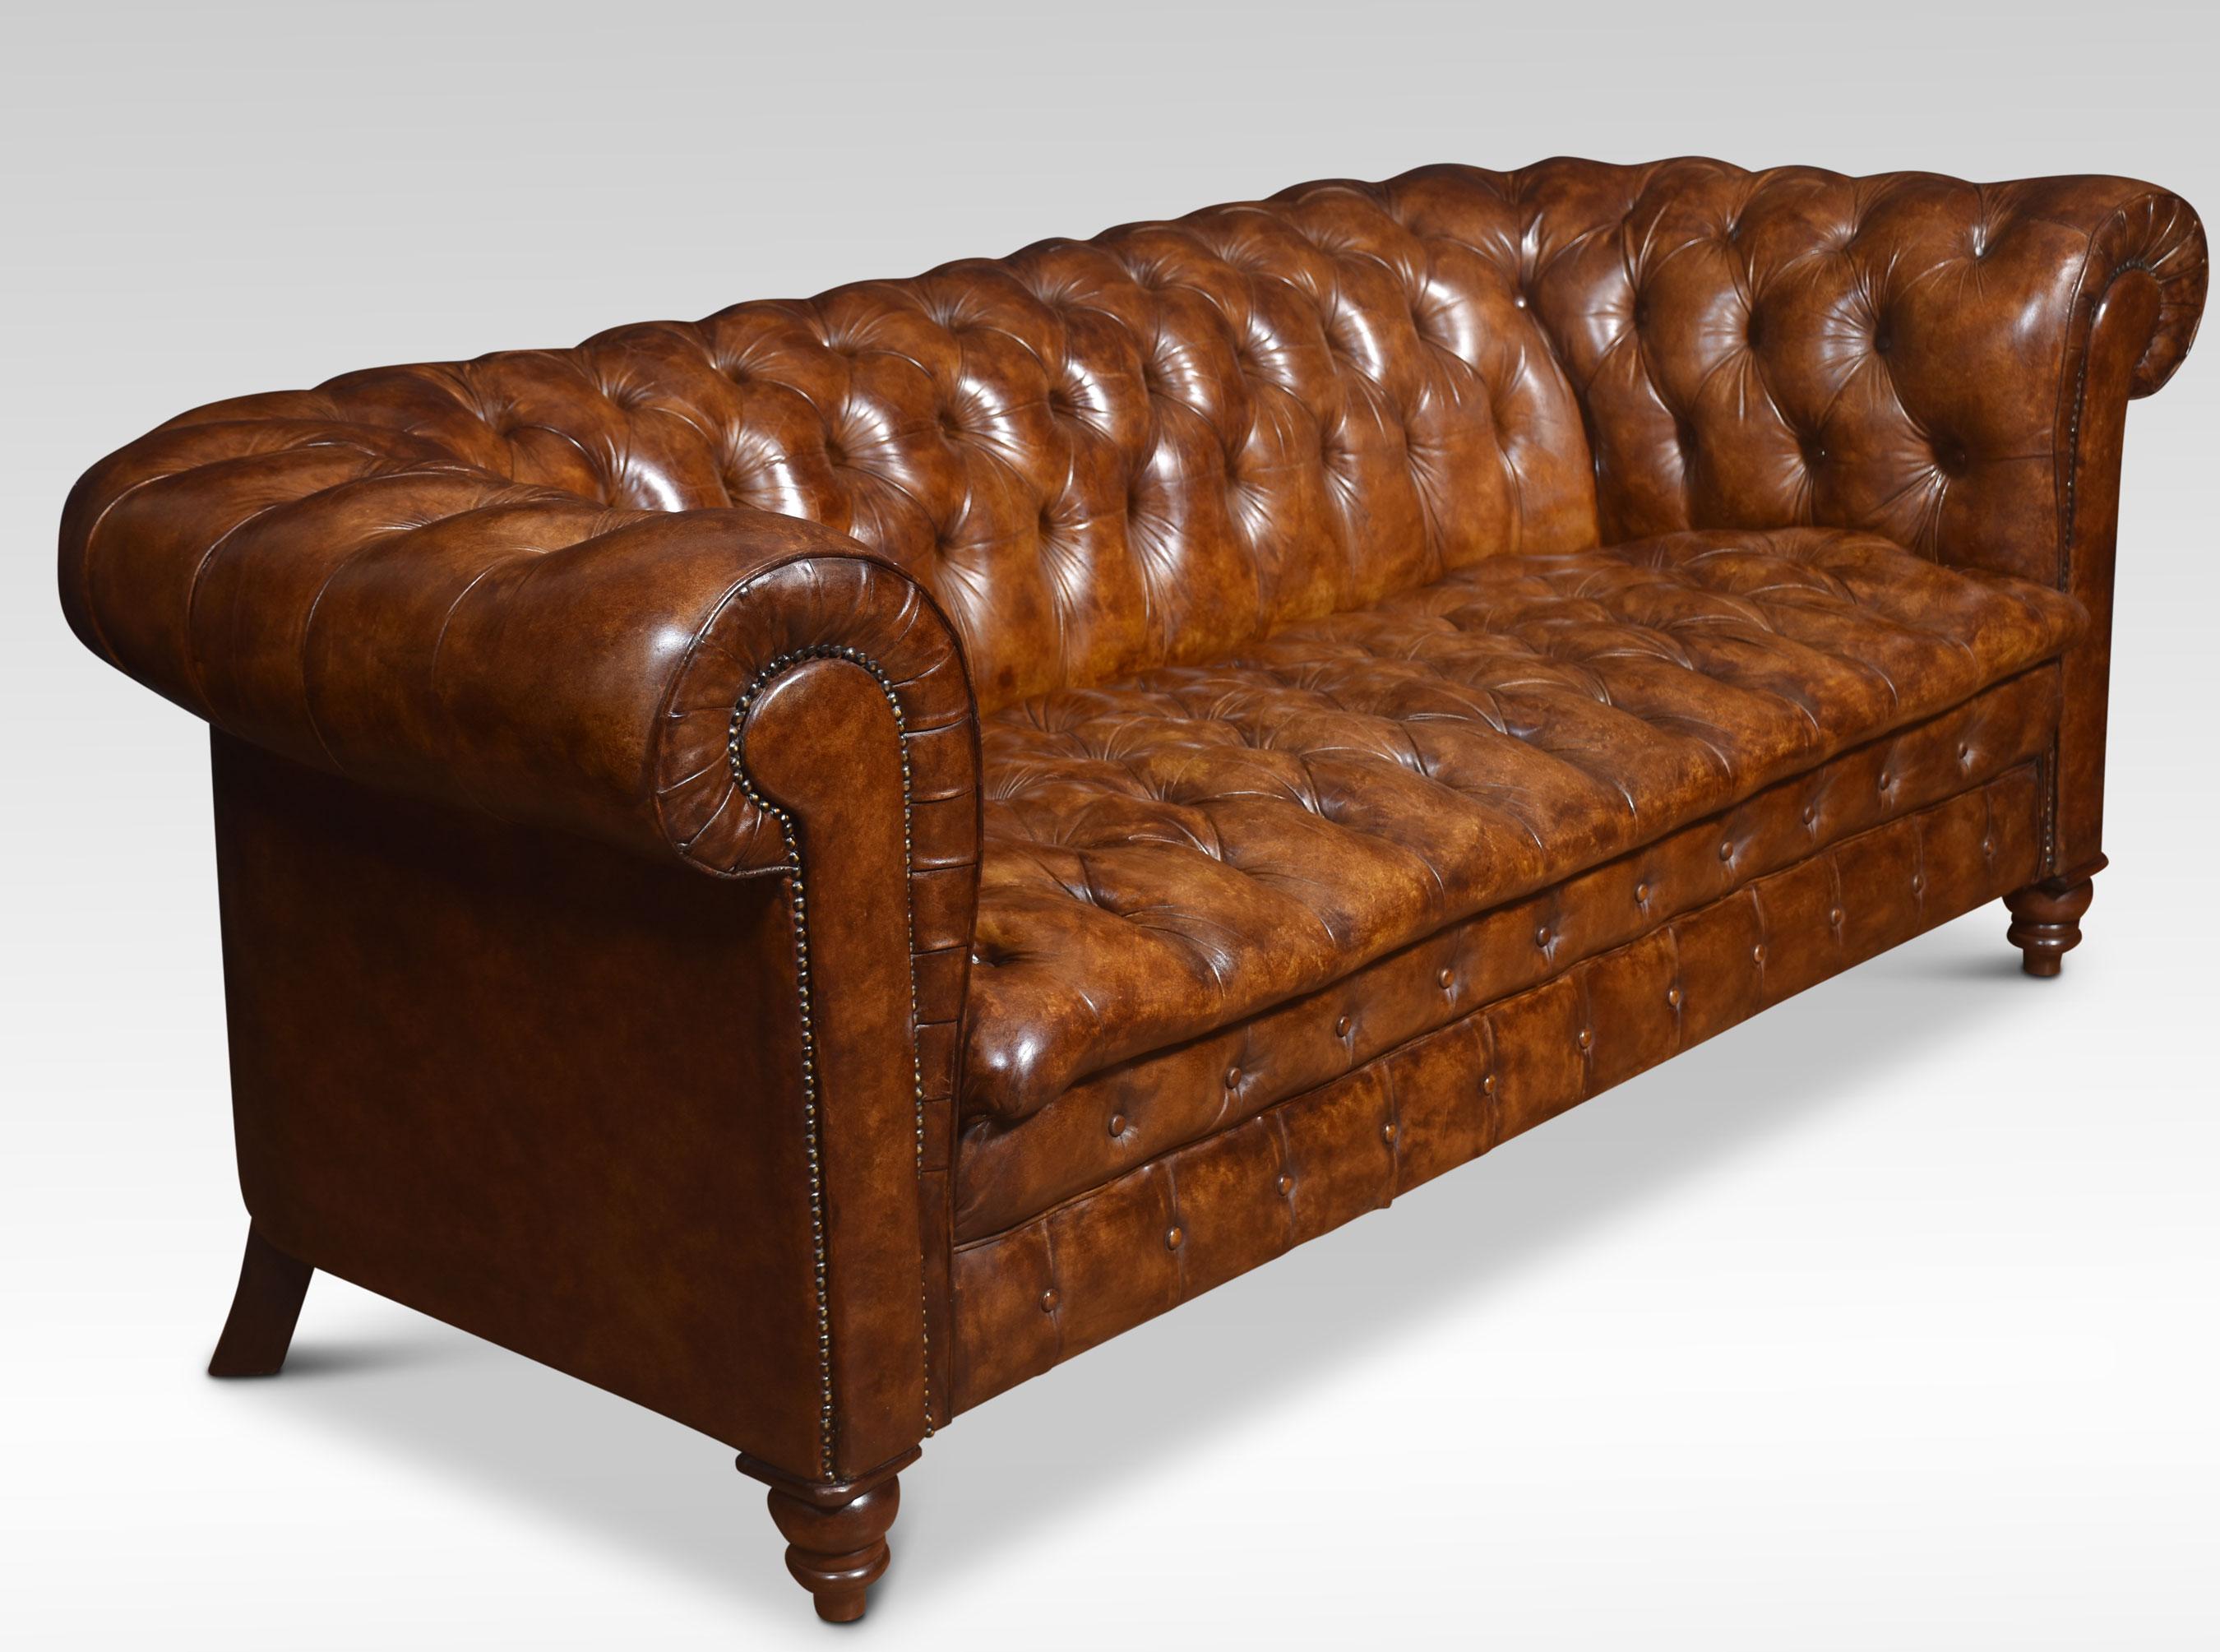 Large brown leather Chesterfield sofa, having deep buttoned back and seat, All raised up on turned feet. Good solid condition, and the leather is soft, and nicely worn in.
Dimensions
Height 31 Inches height to seat 18 Inches
Width 79 Inches
Depth 36